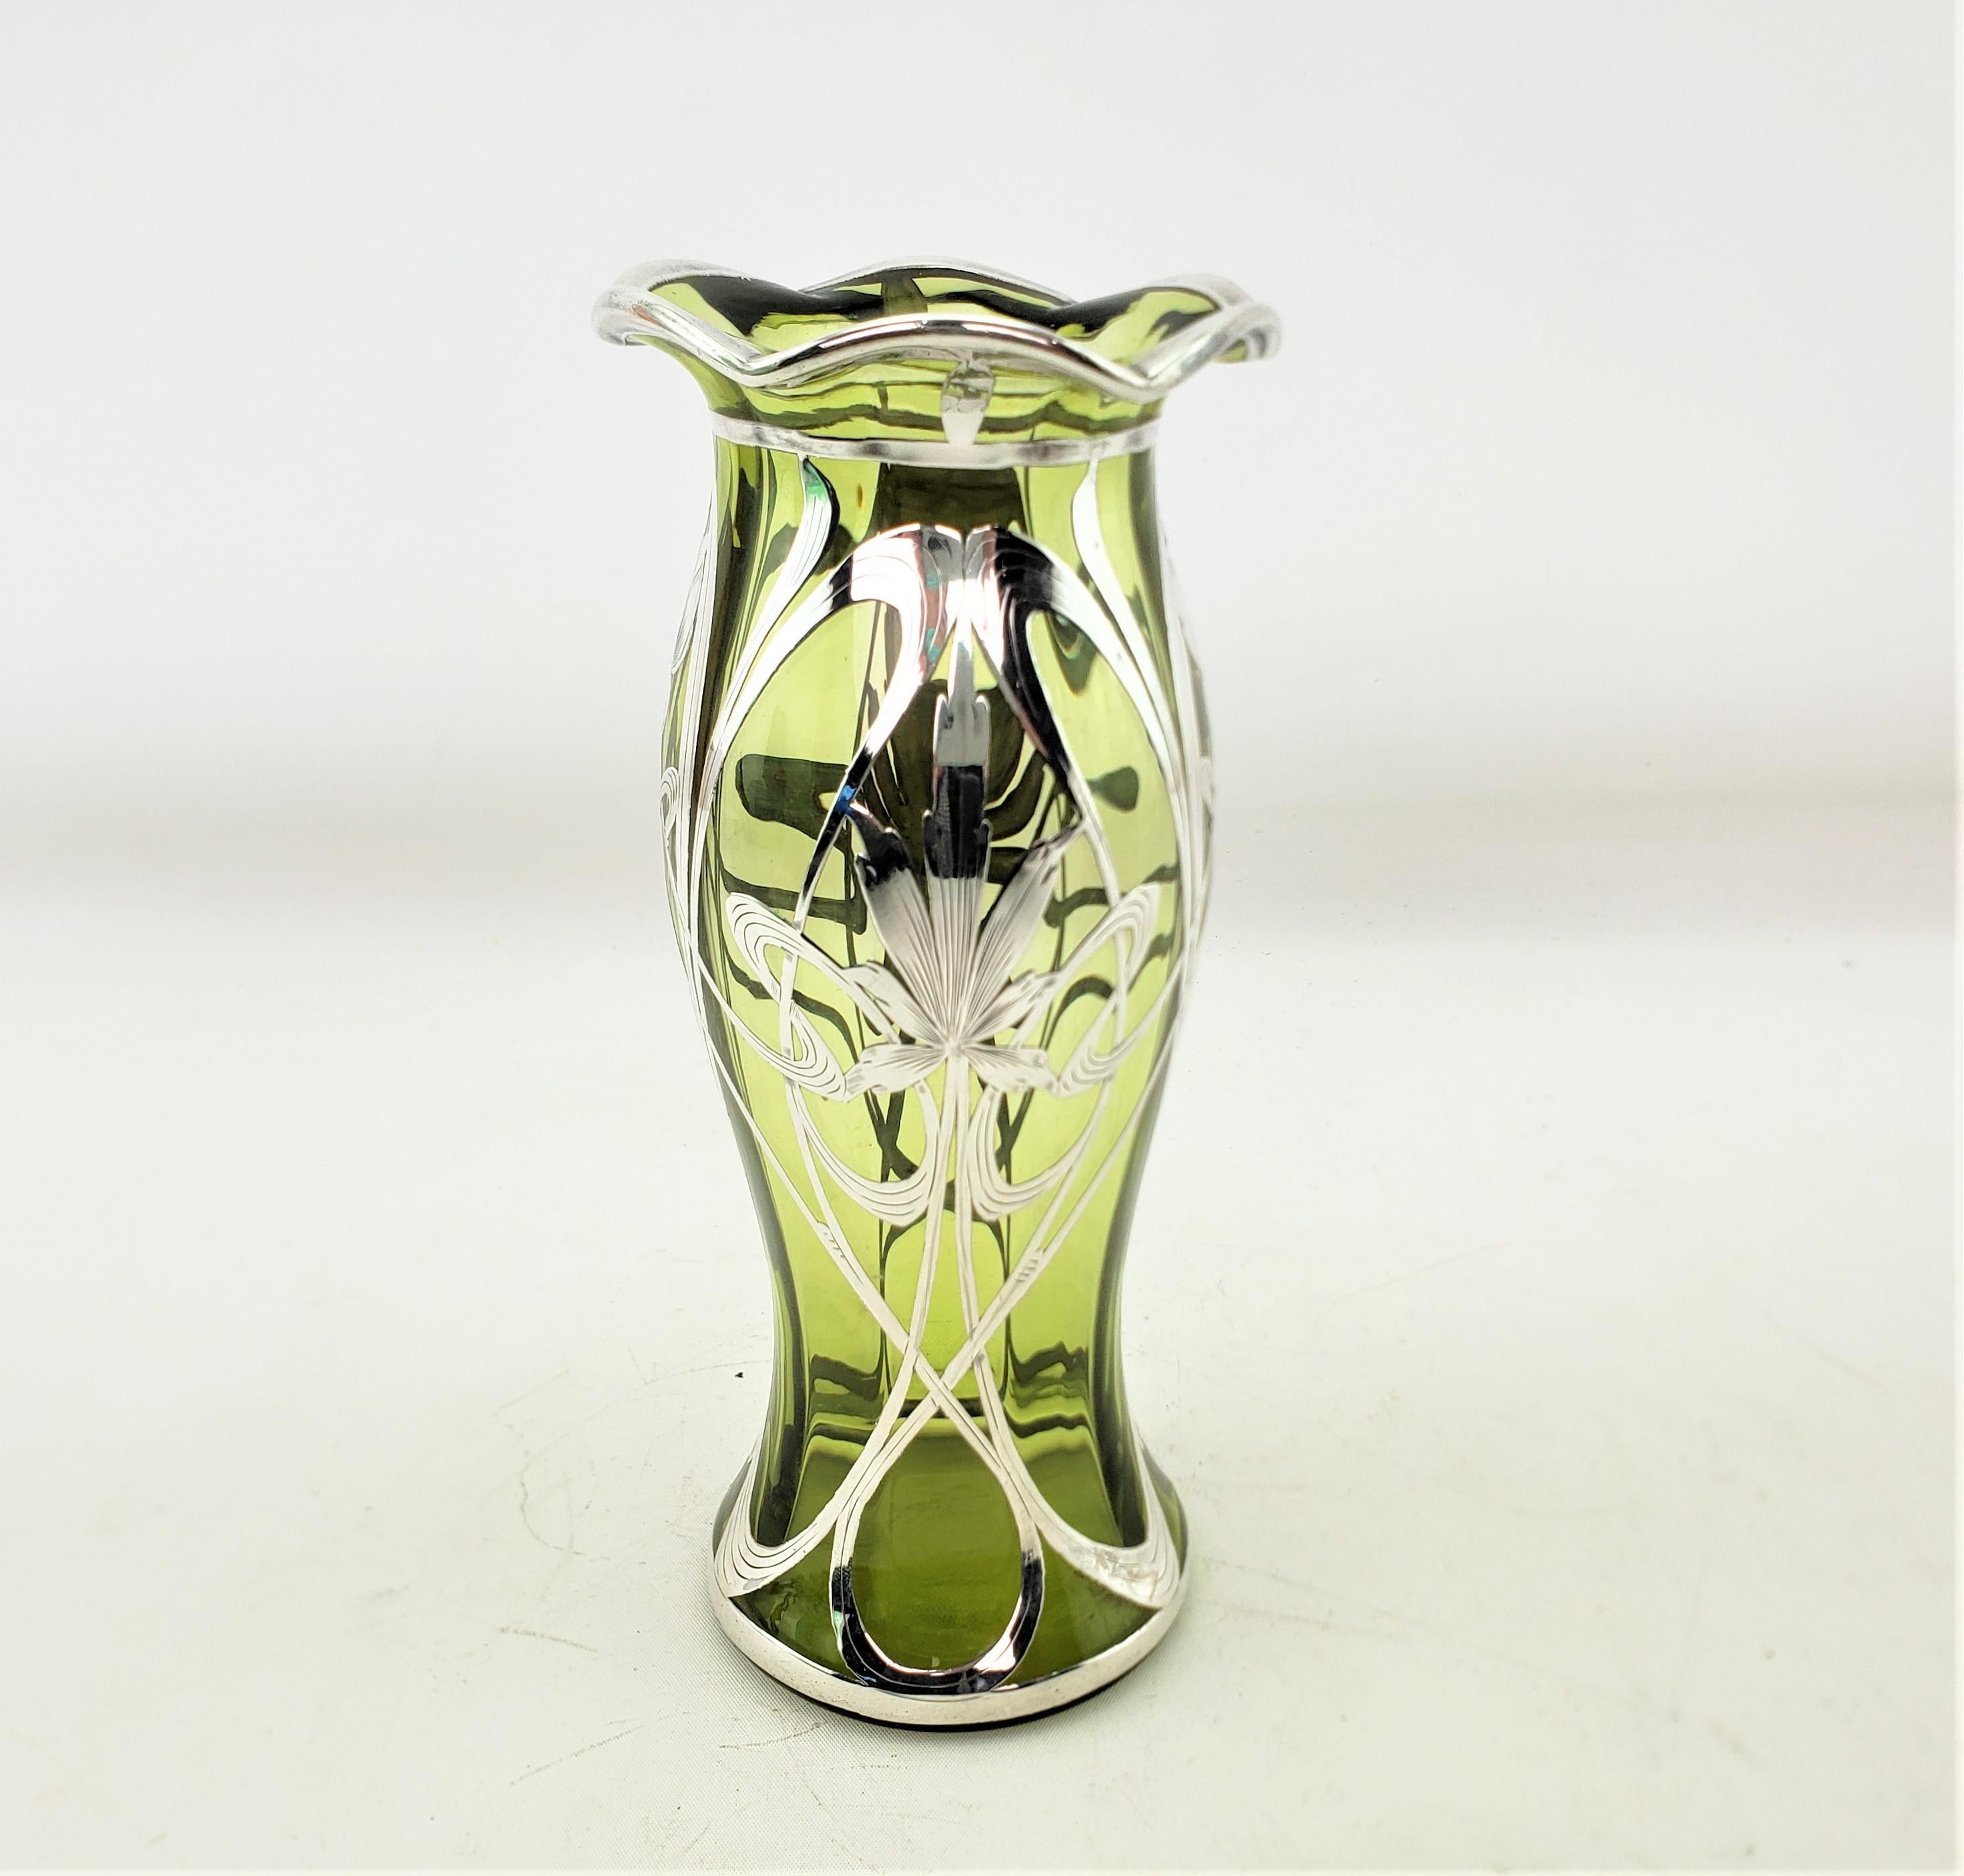 Antique Art Nouveau Sterling Silver Overlay Green Glass Vase with Floral Motif In Good Condition For Sale In Hamilton, Ontario